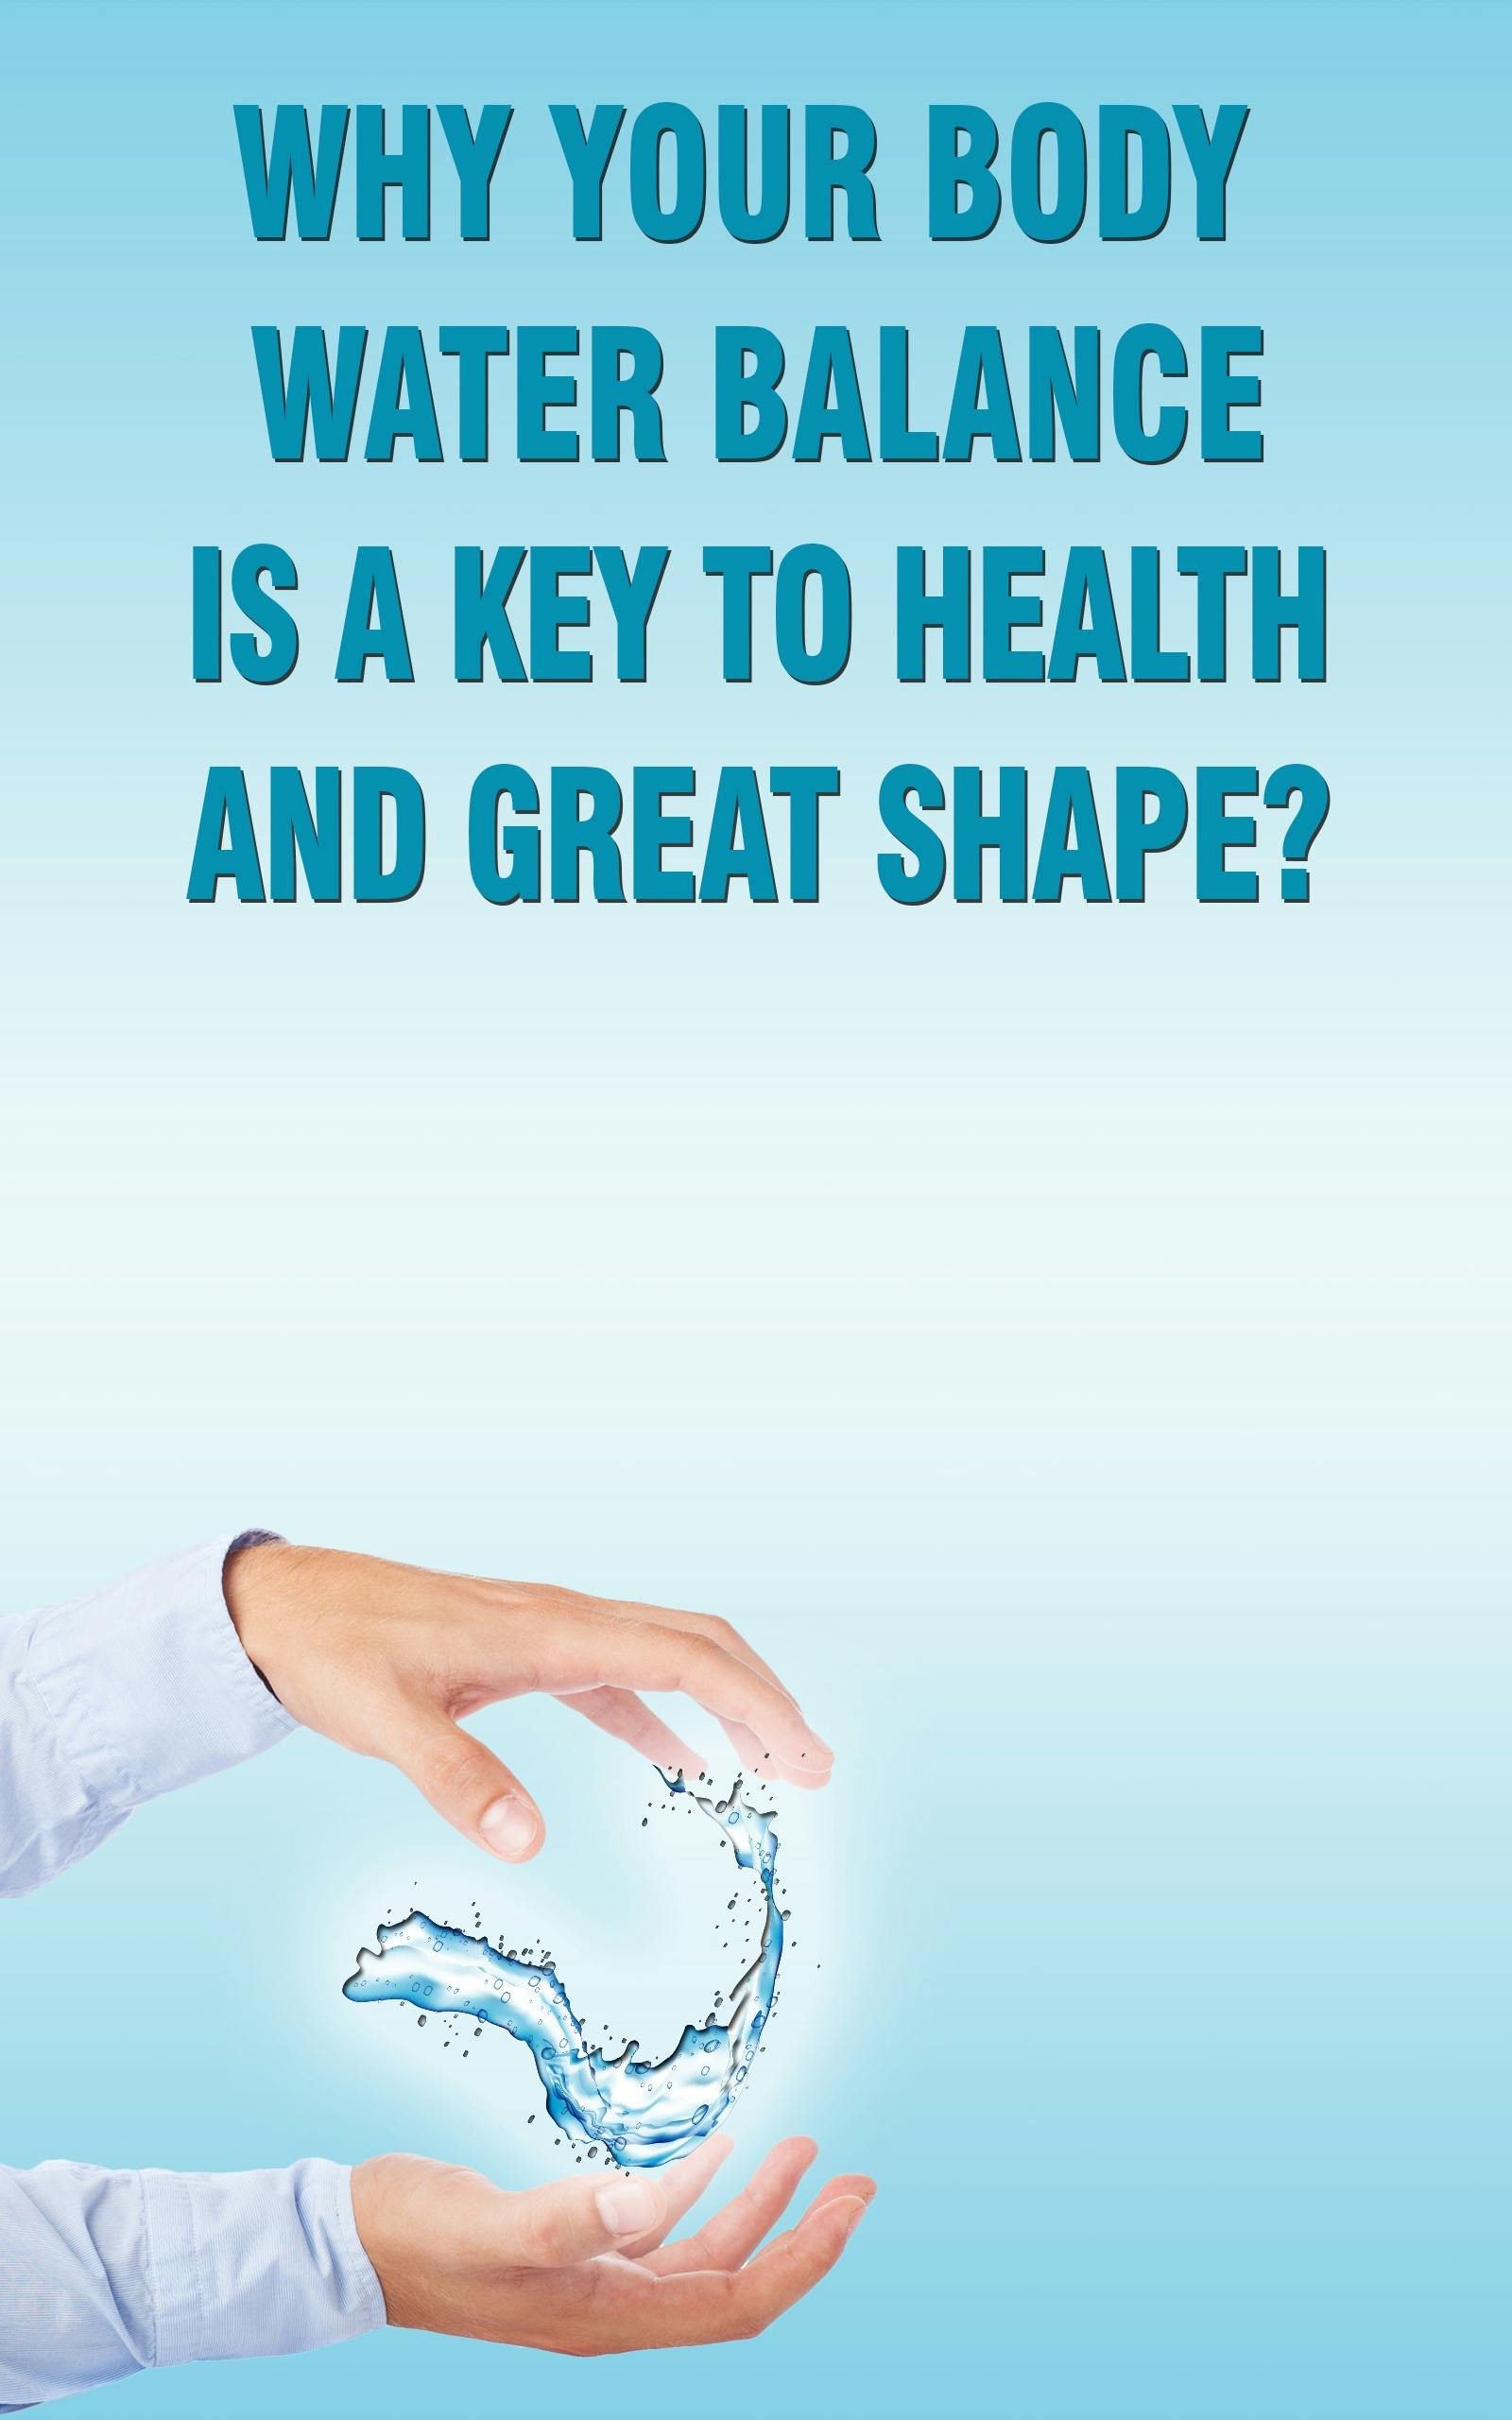 Why Your Body Water Balance Is a Key to Health and Great Shape? - Andrei Besedin